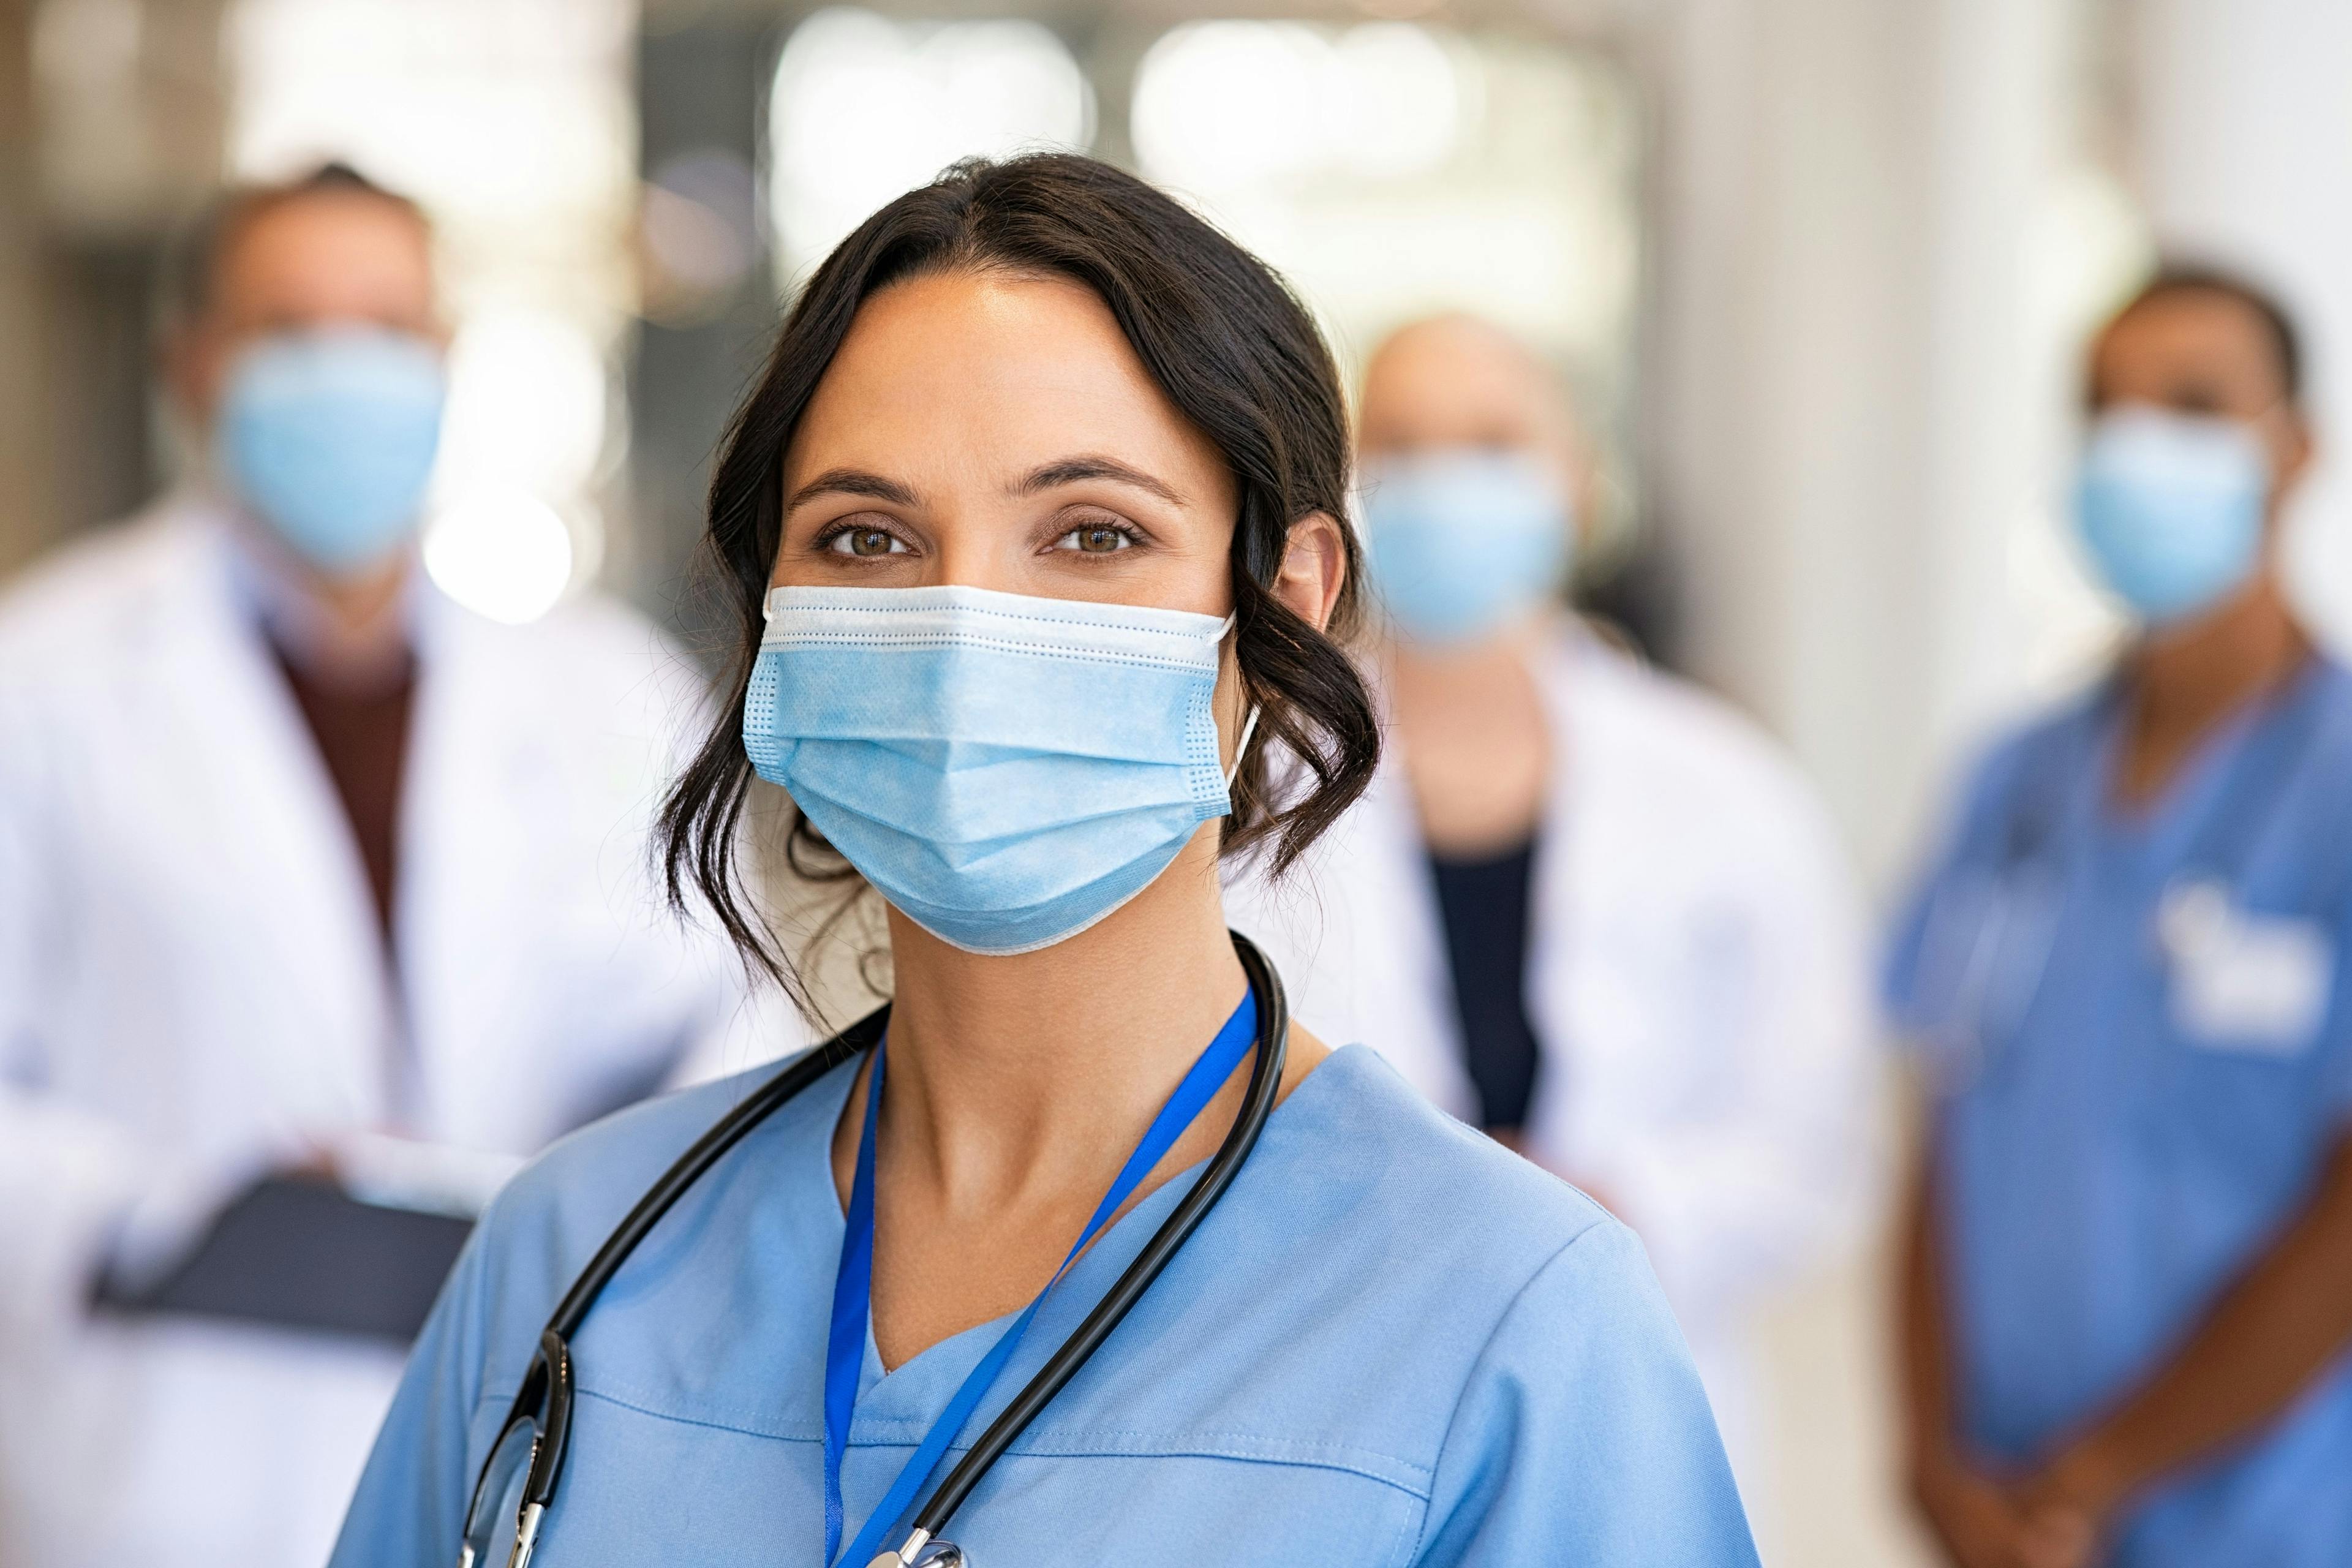 Should Health Care Workers Keep Wearing Masks With Patients Now That the COVID-19 Public Health Emergency Is Over?